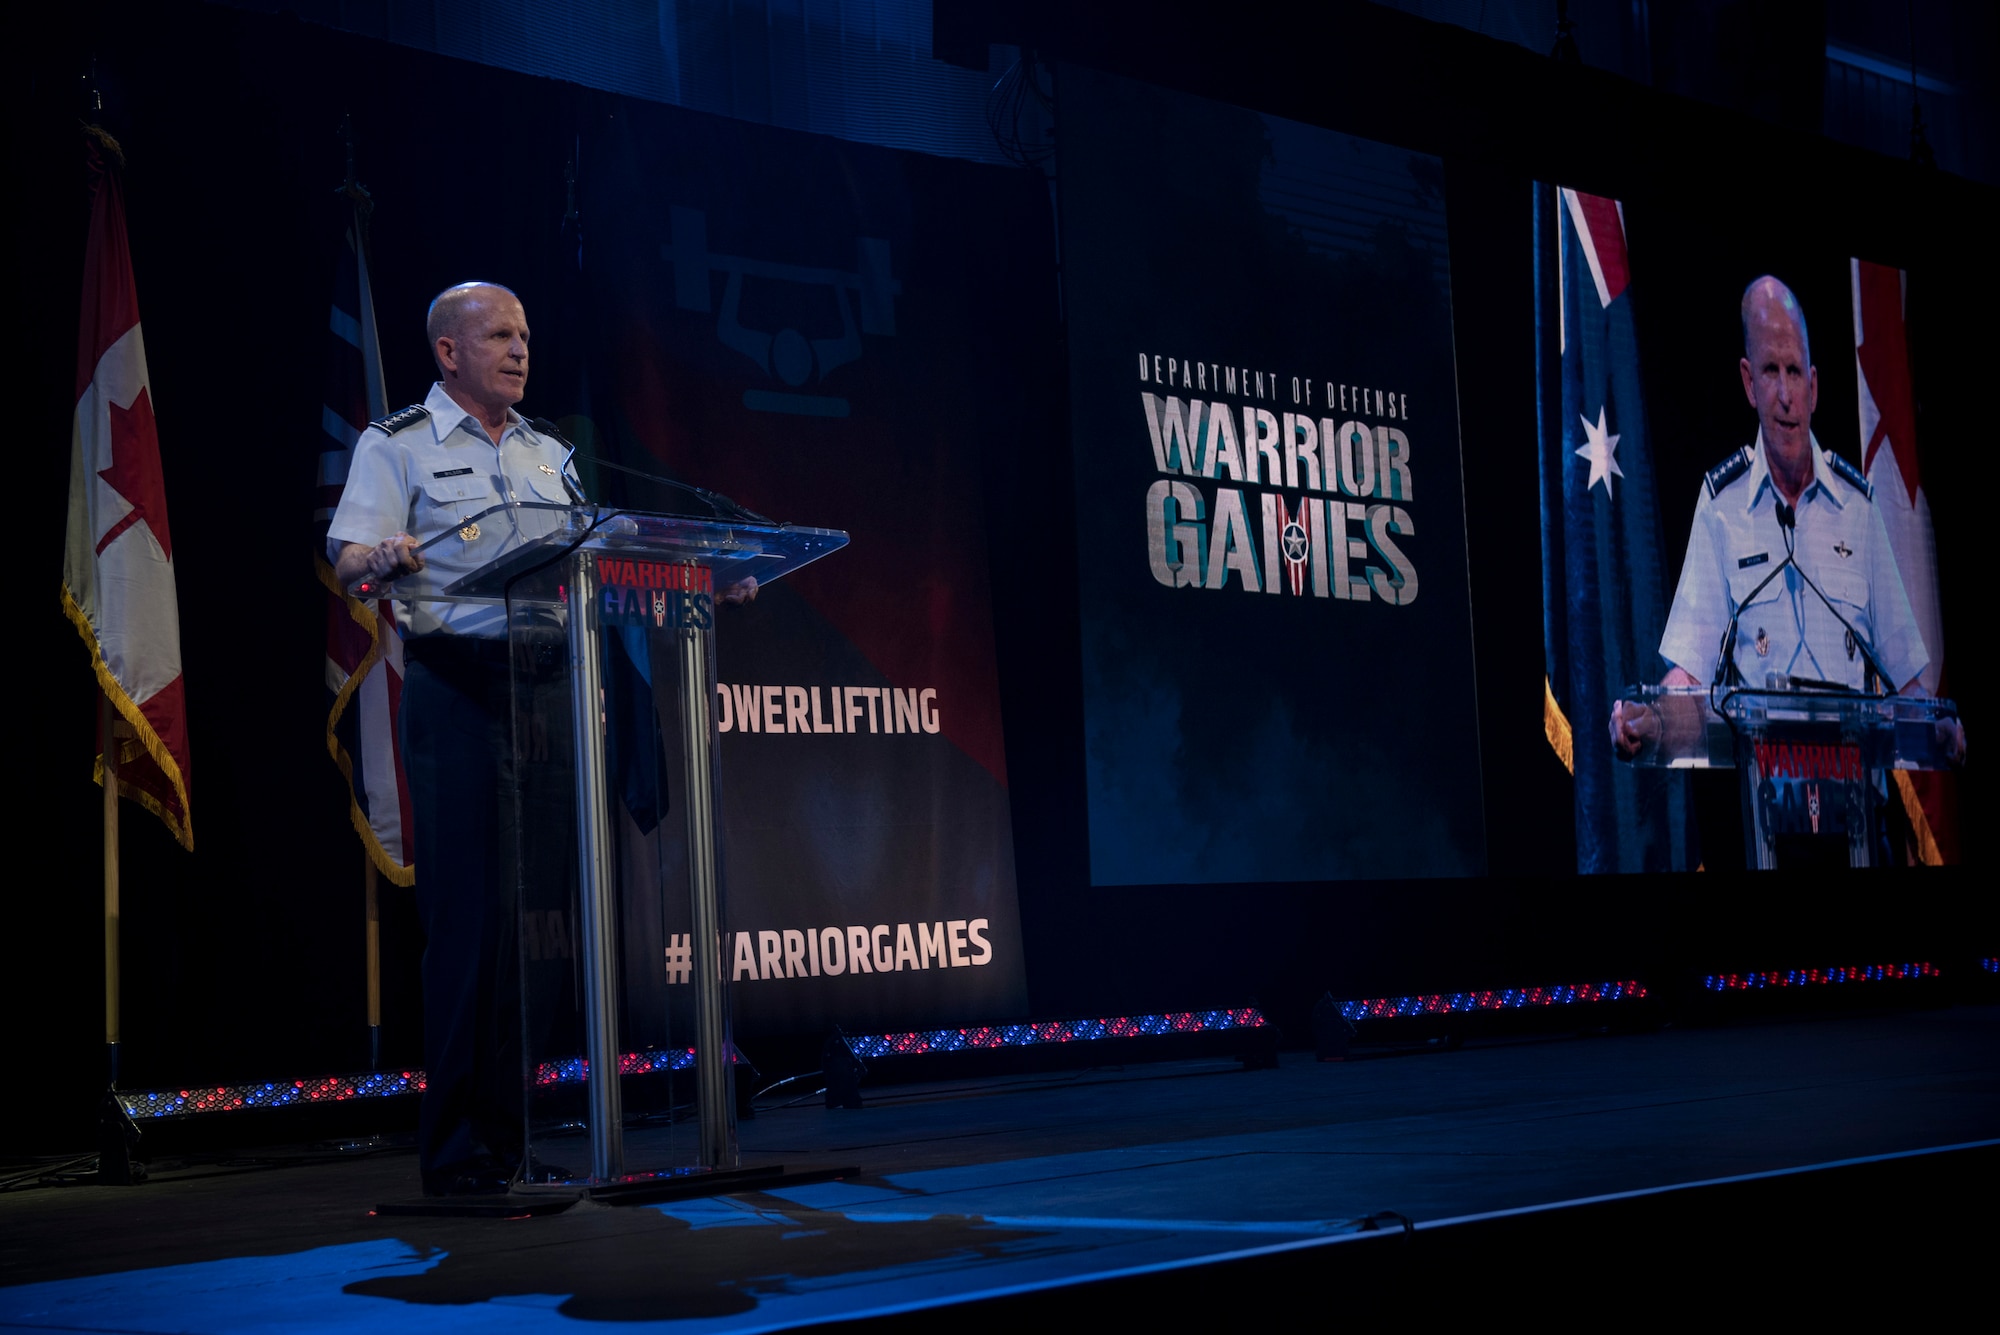 Air Force Vice Chief of Staff Gen. Stephen W. Wilson provides remarks at the closing ceremony of the Department of Defense Warrior Games in Colorado Springs, Colo., June 9, 2018. Wounded, ill and injured service members and veterans from the U.S. Air Force, Army, Marine Corps, Navy, and Special Operations Command, as well as athletes from the U.K. Armed Forces, Australian Defence Force and Canadian Armed Forces, competed in one or more of 11 different events held throughout the Games. (U.S. Air Force photo by Senior Airman Dennis Hoffman)